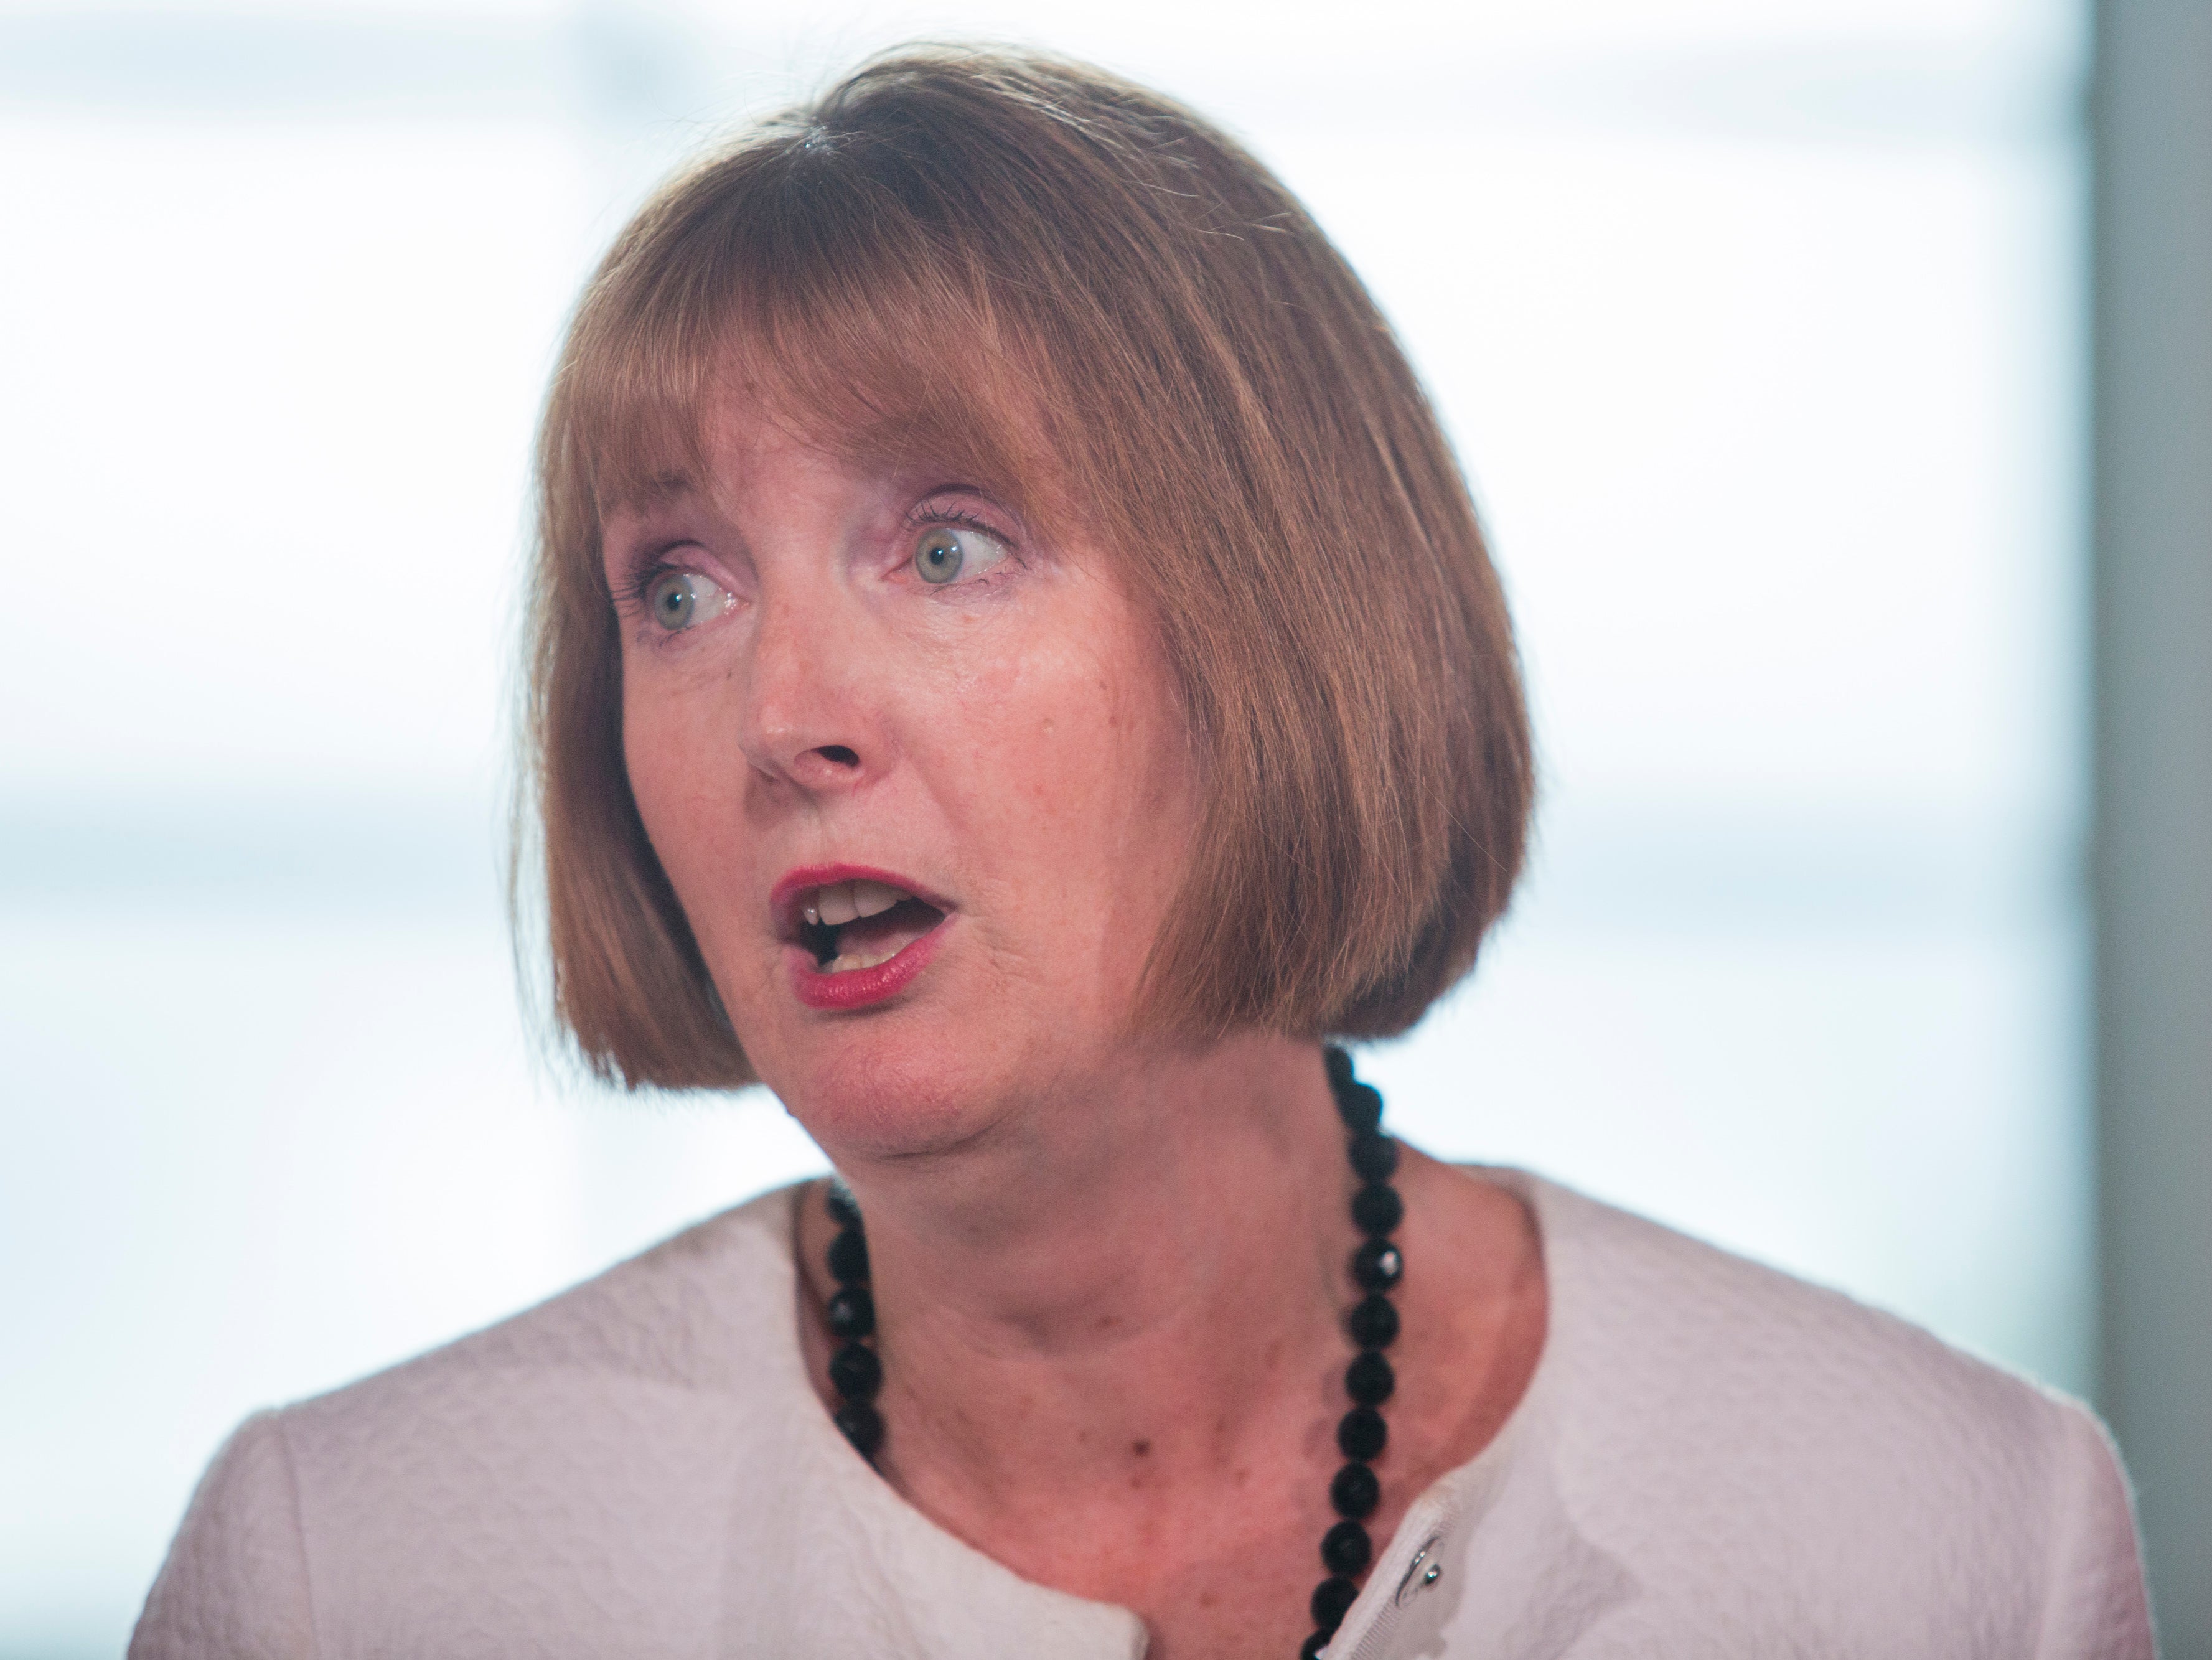 Harriet Harman chairs the cross-party committee of MPs and peers